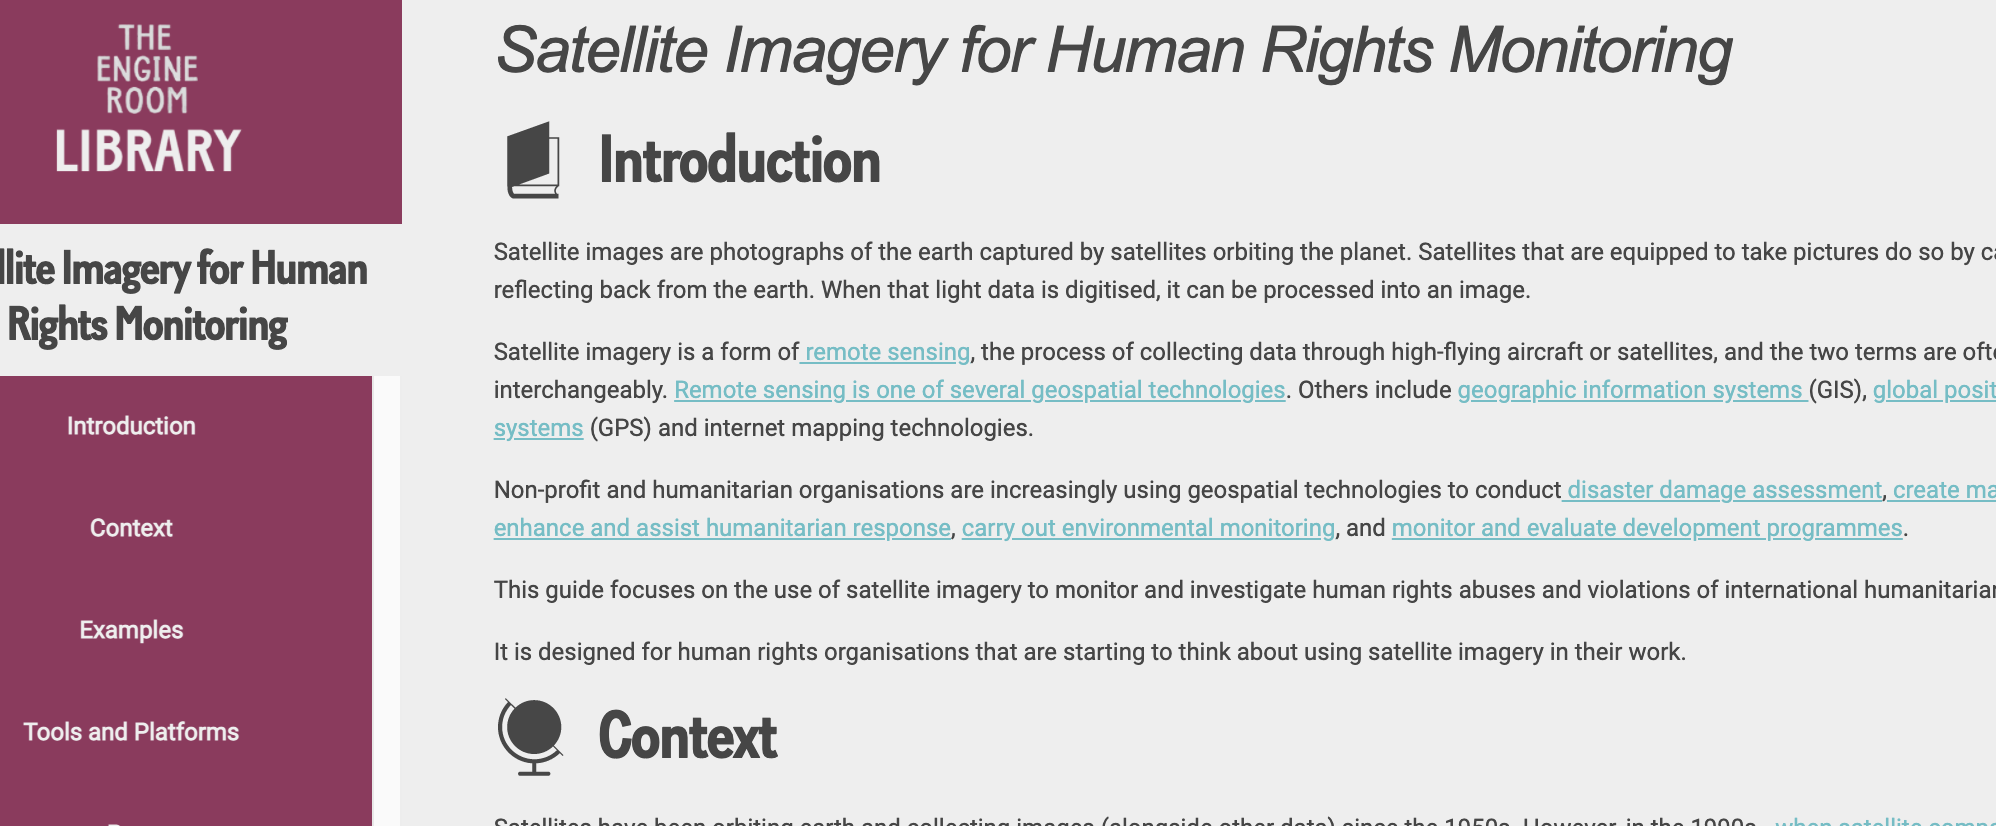 Satellite Imagery for Human Rights Monitoring